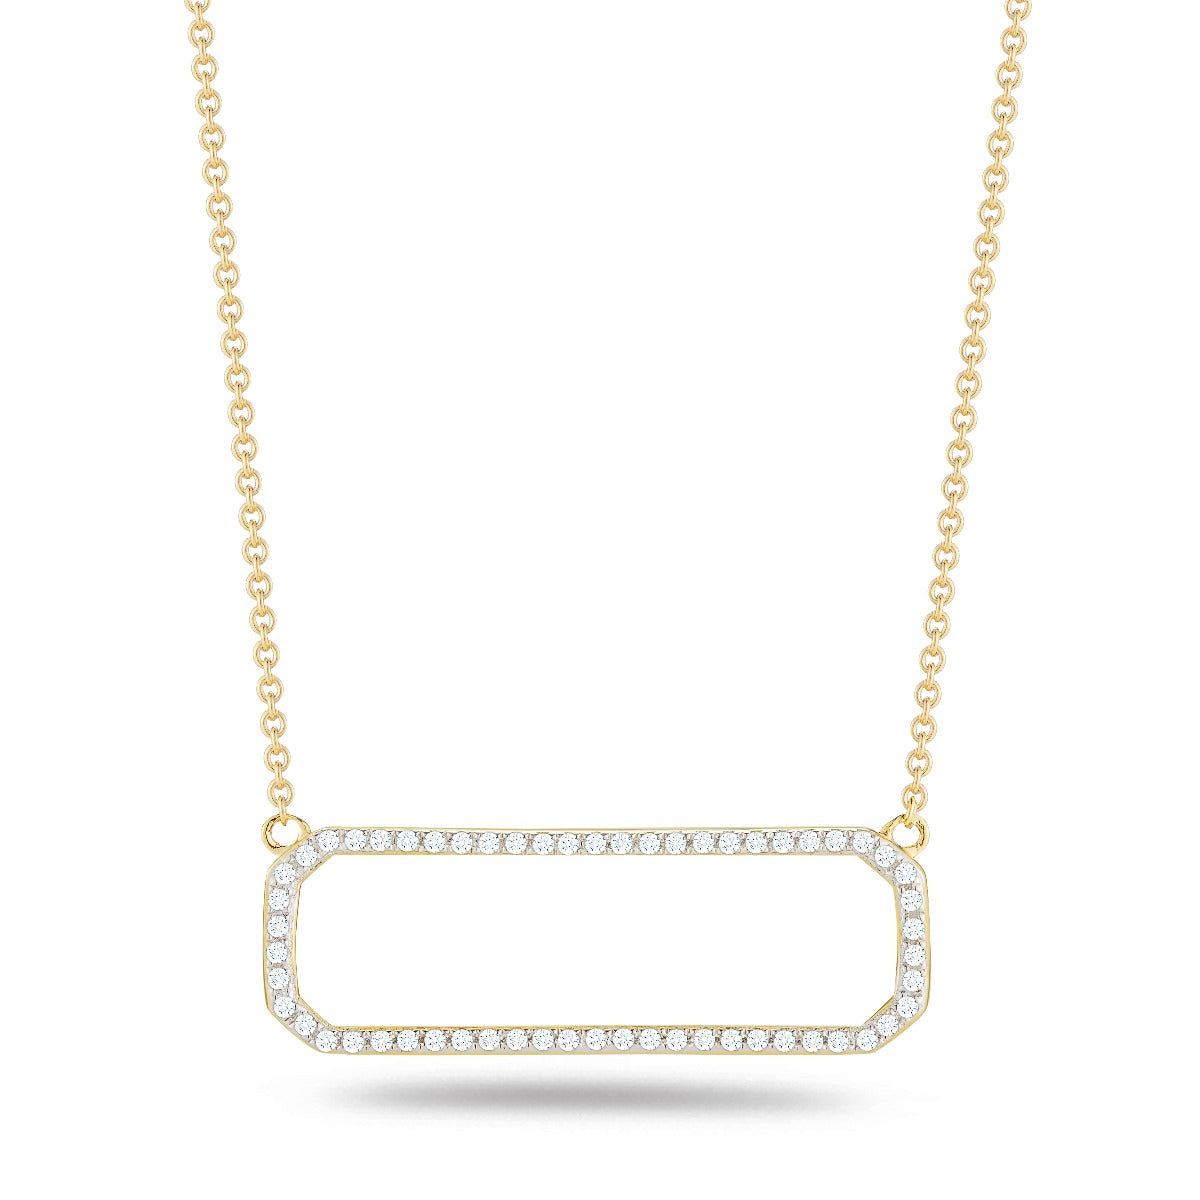 GEOMETRIC SHAPED PENDANT IN 14K WITH DIAMONDS 0.35CT ON 18 INCHES CHAIN